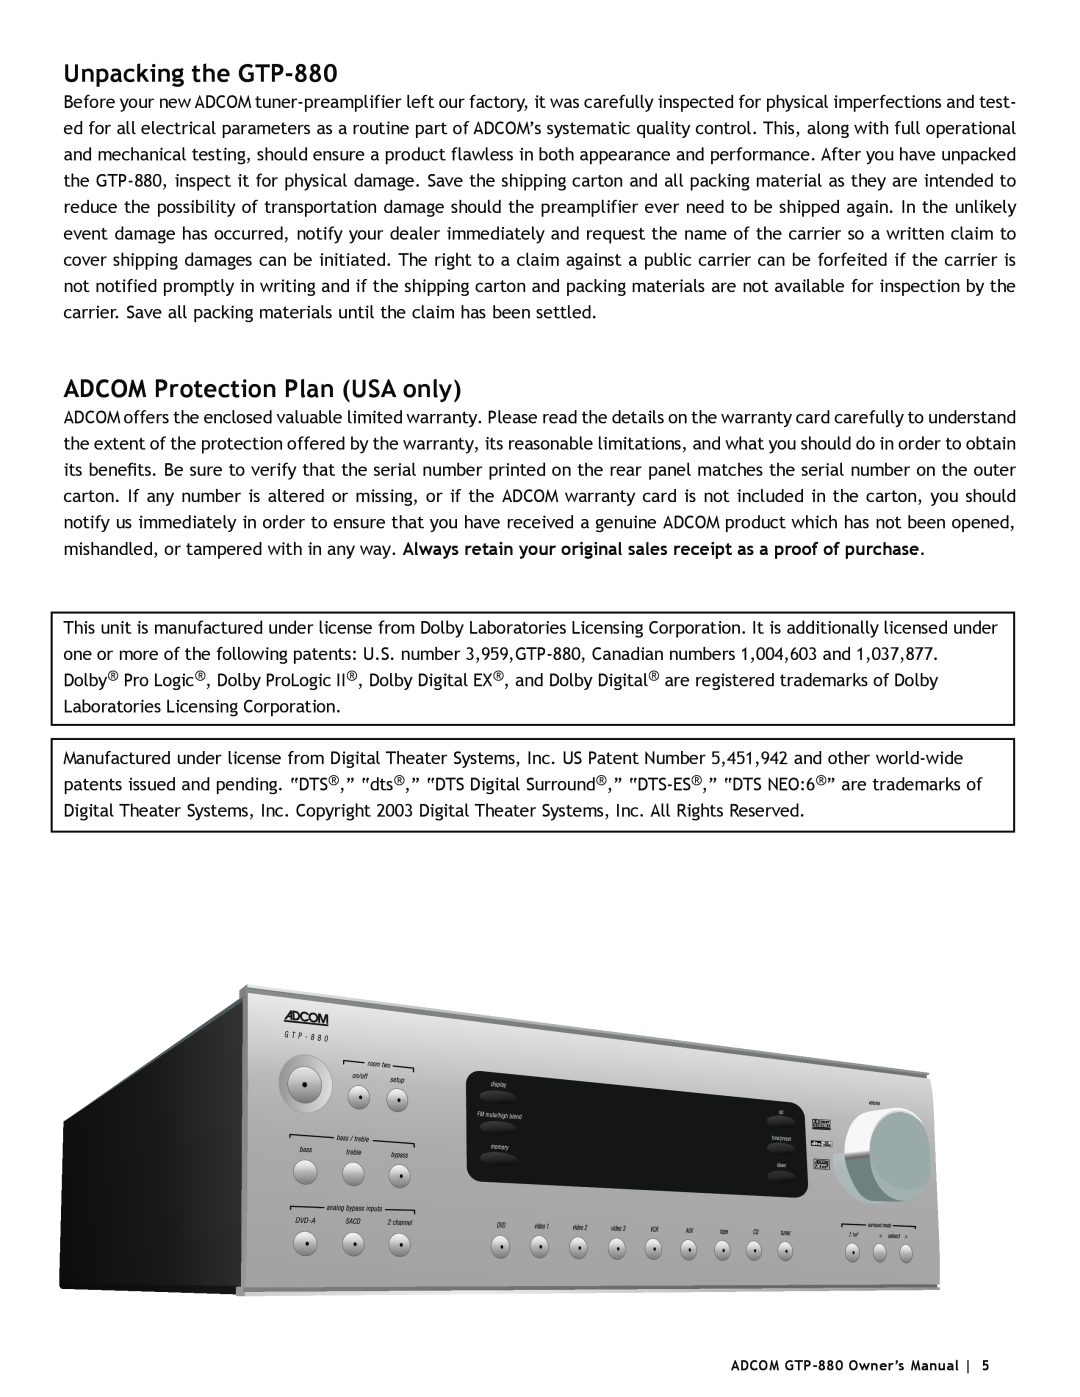 Adcom owner manual Unpacking the GTP-880, ADCOM Protection Plan USA only 